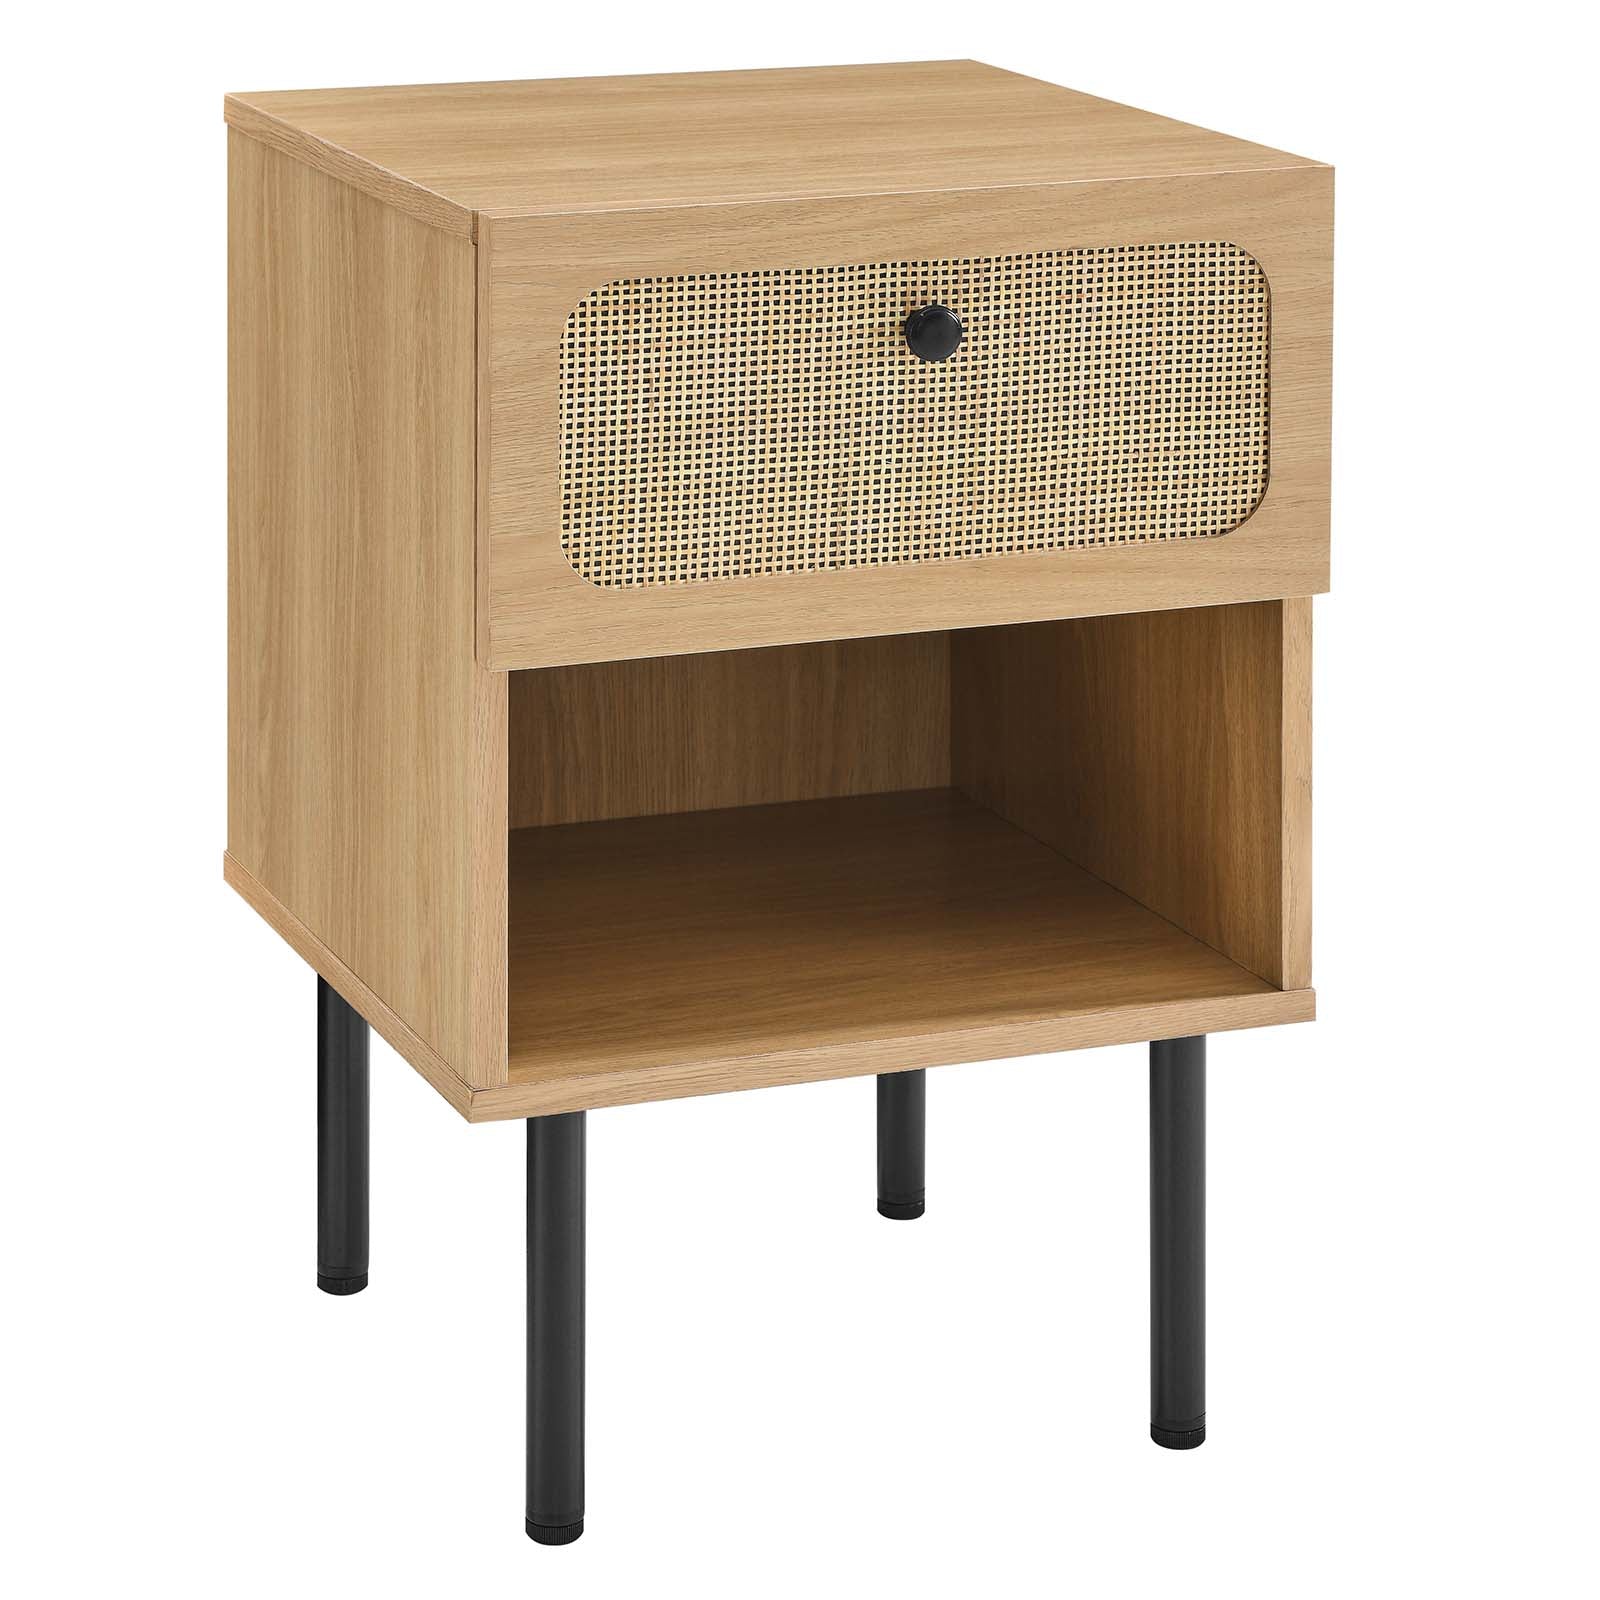 Chaucer Nightstand - East Shore Modern Home Furnishings